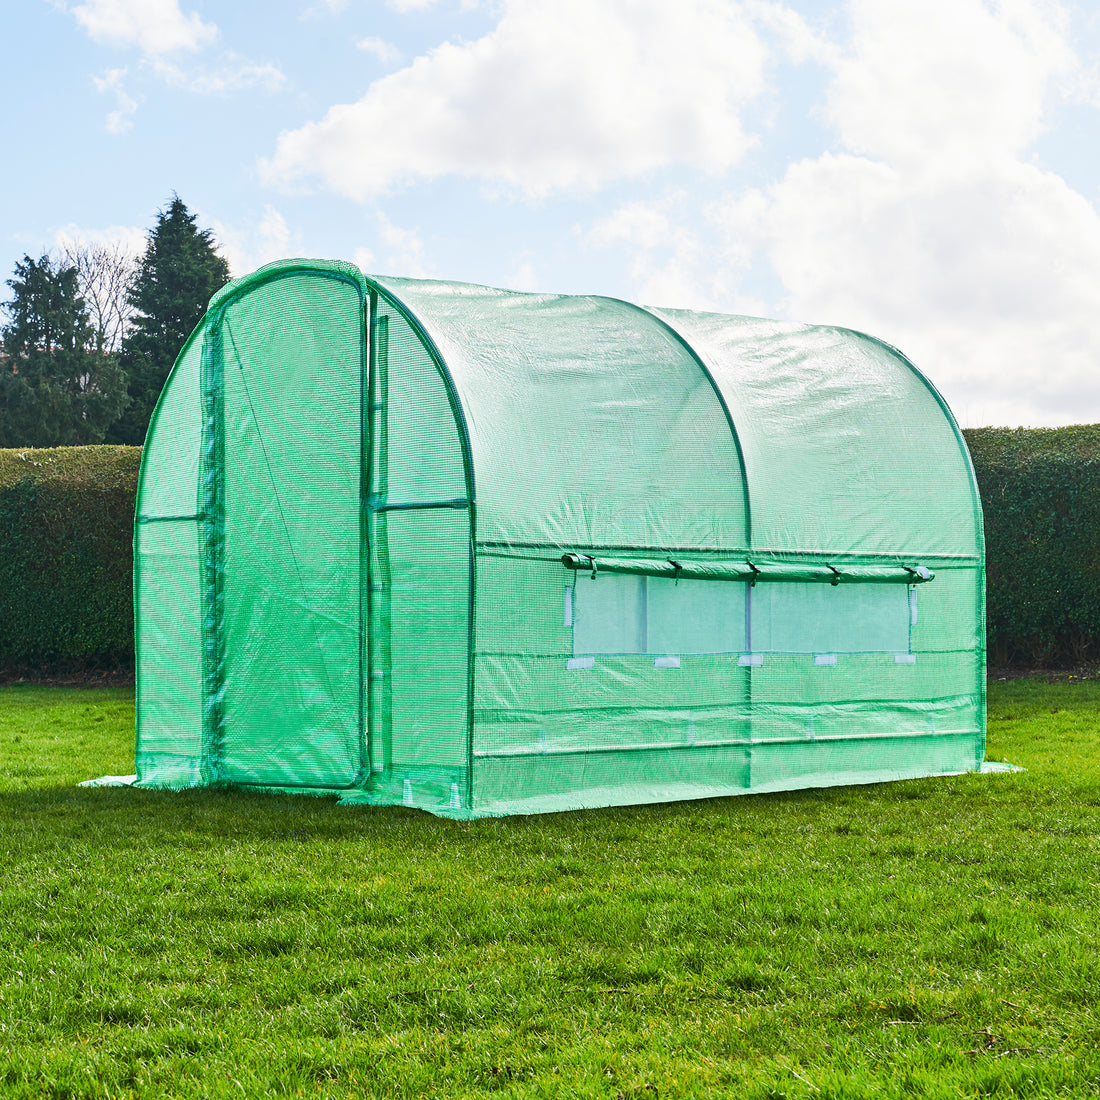 How to build a polytunnel - video tutorial